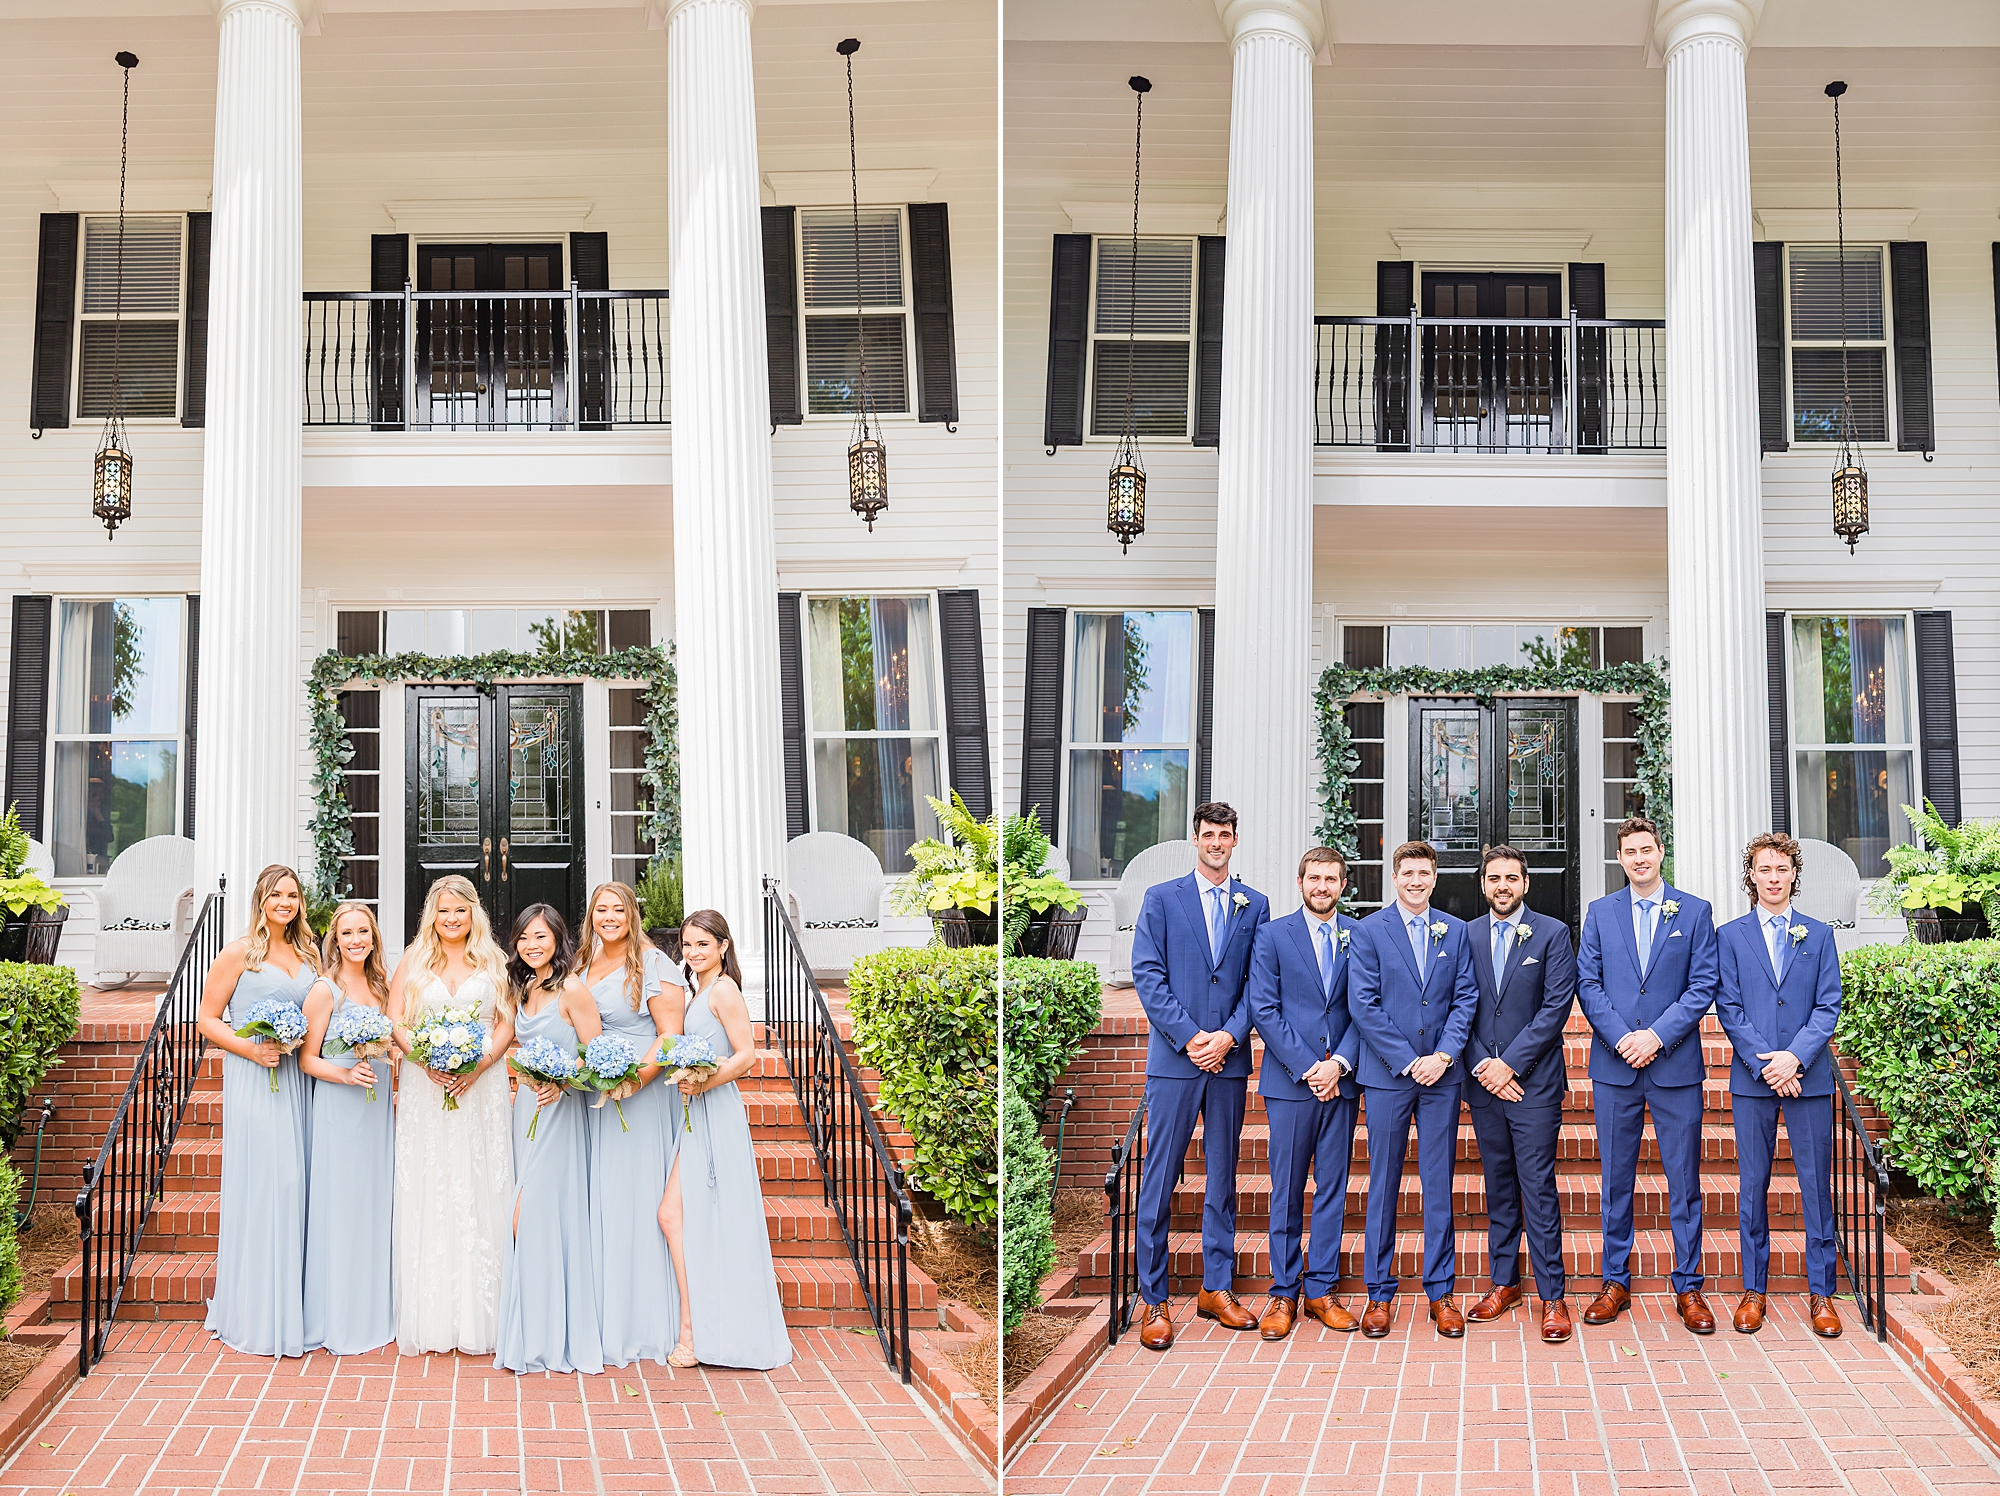 wedding party poses outside Victoria Belle Mansion in blue attire for spring wedding